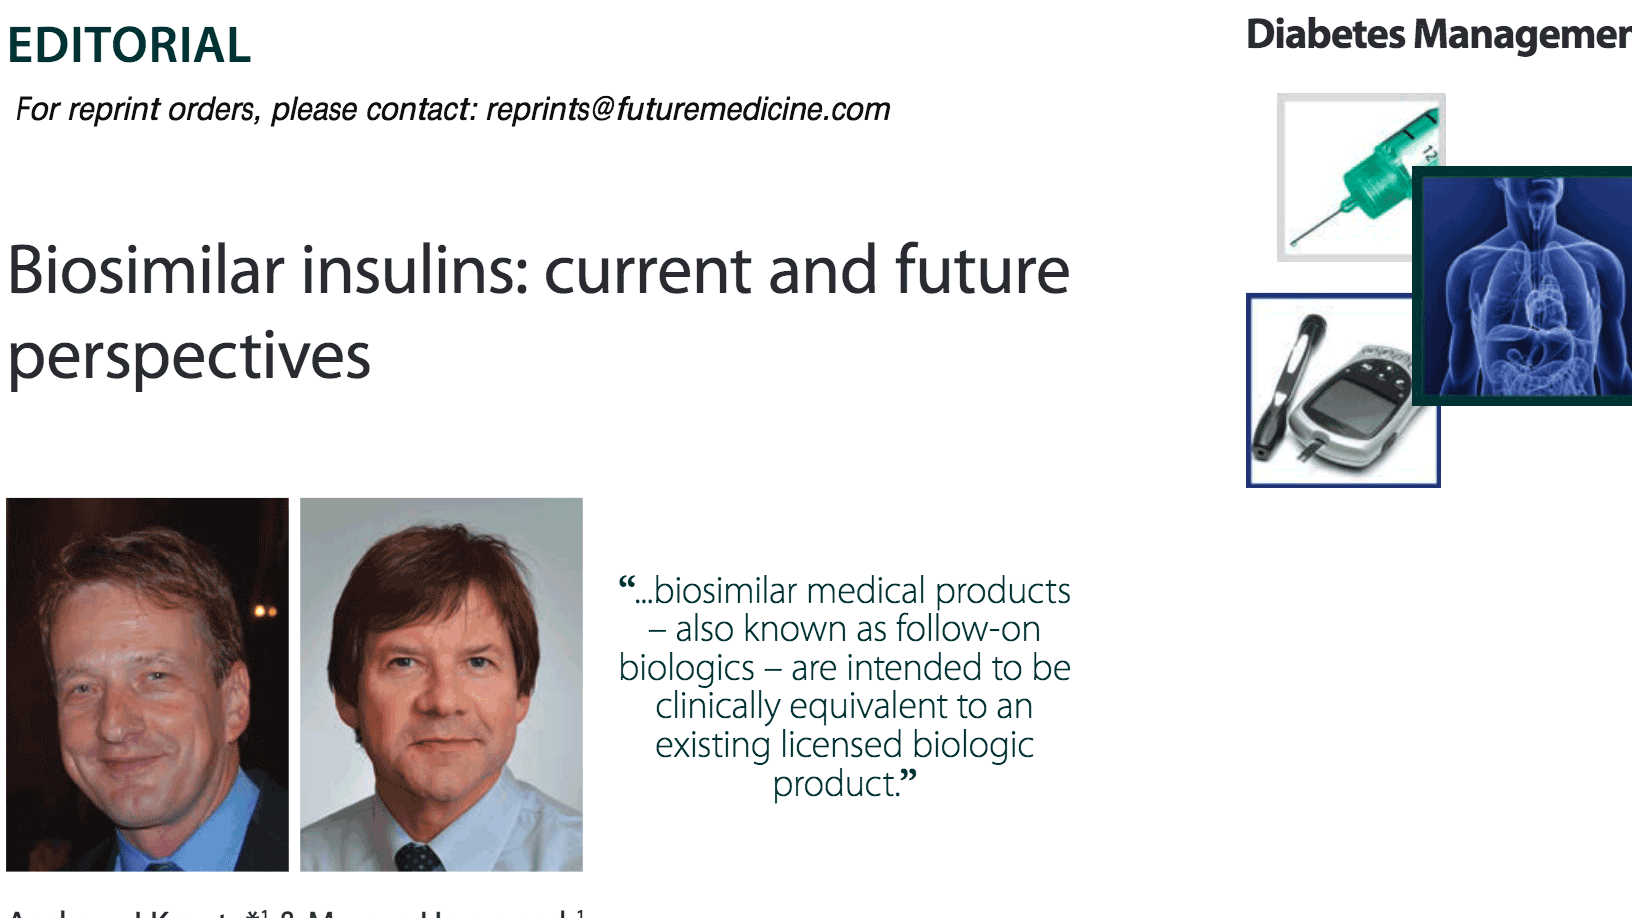 Biosimilar insulins: current and future perspectives thumbnail